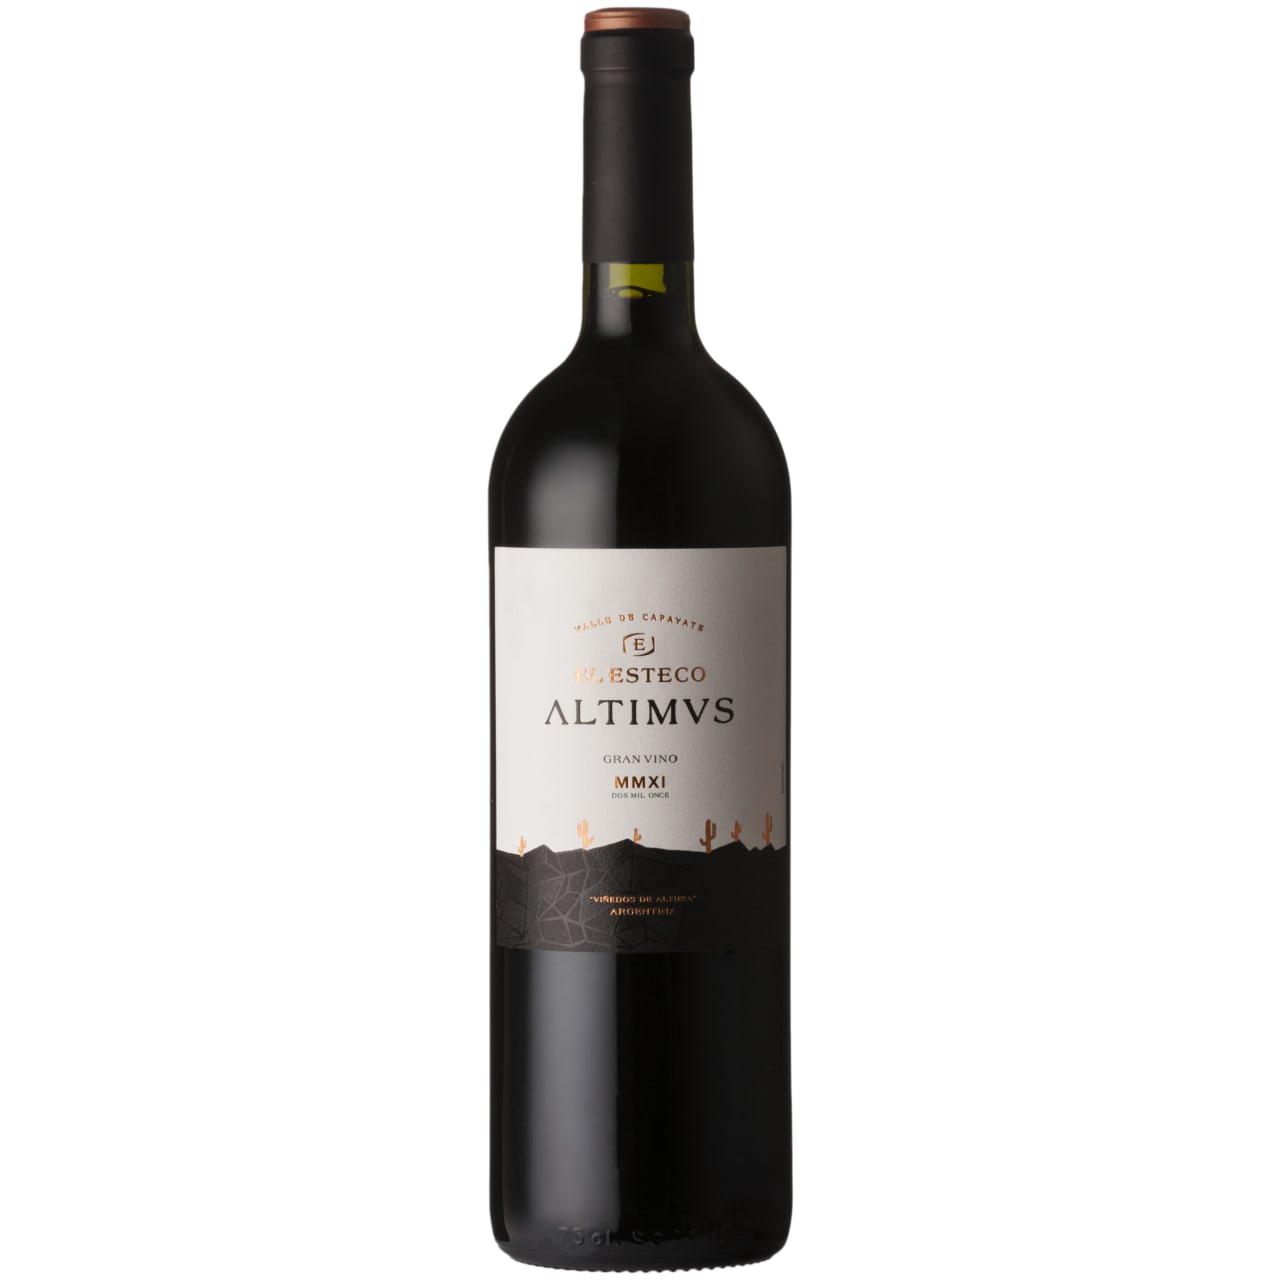 Complex with refined aromas of baked red fruits, dark chocolate and toasty oak.